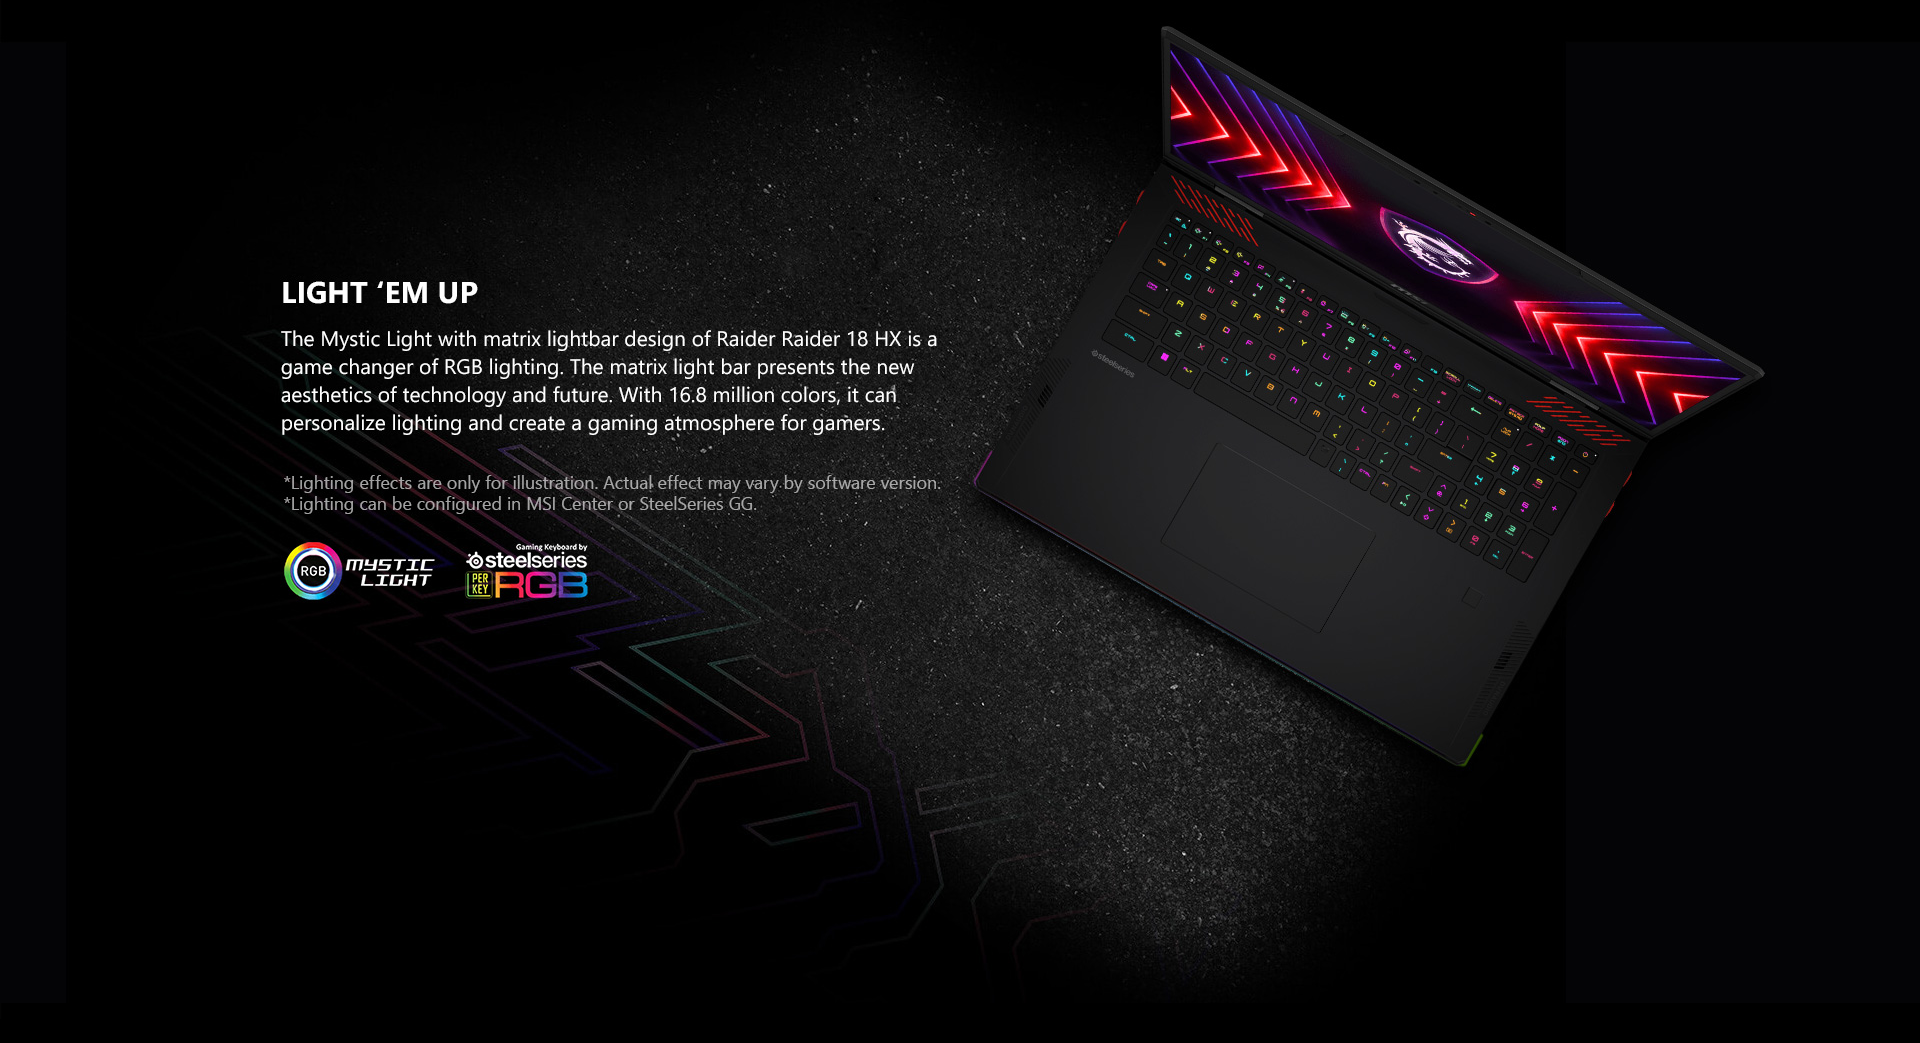 The Mystic Light with matrix lightbar design of Raider Raider 18 HX is a game changer of RGB lighting. The matrix light bar presents the new aesthetics of technology and future. With 16.8 million colors, it can personalize lighting and create a gaming atmosphere for gamers.